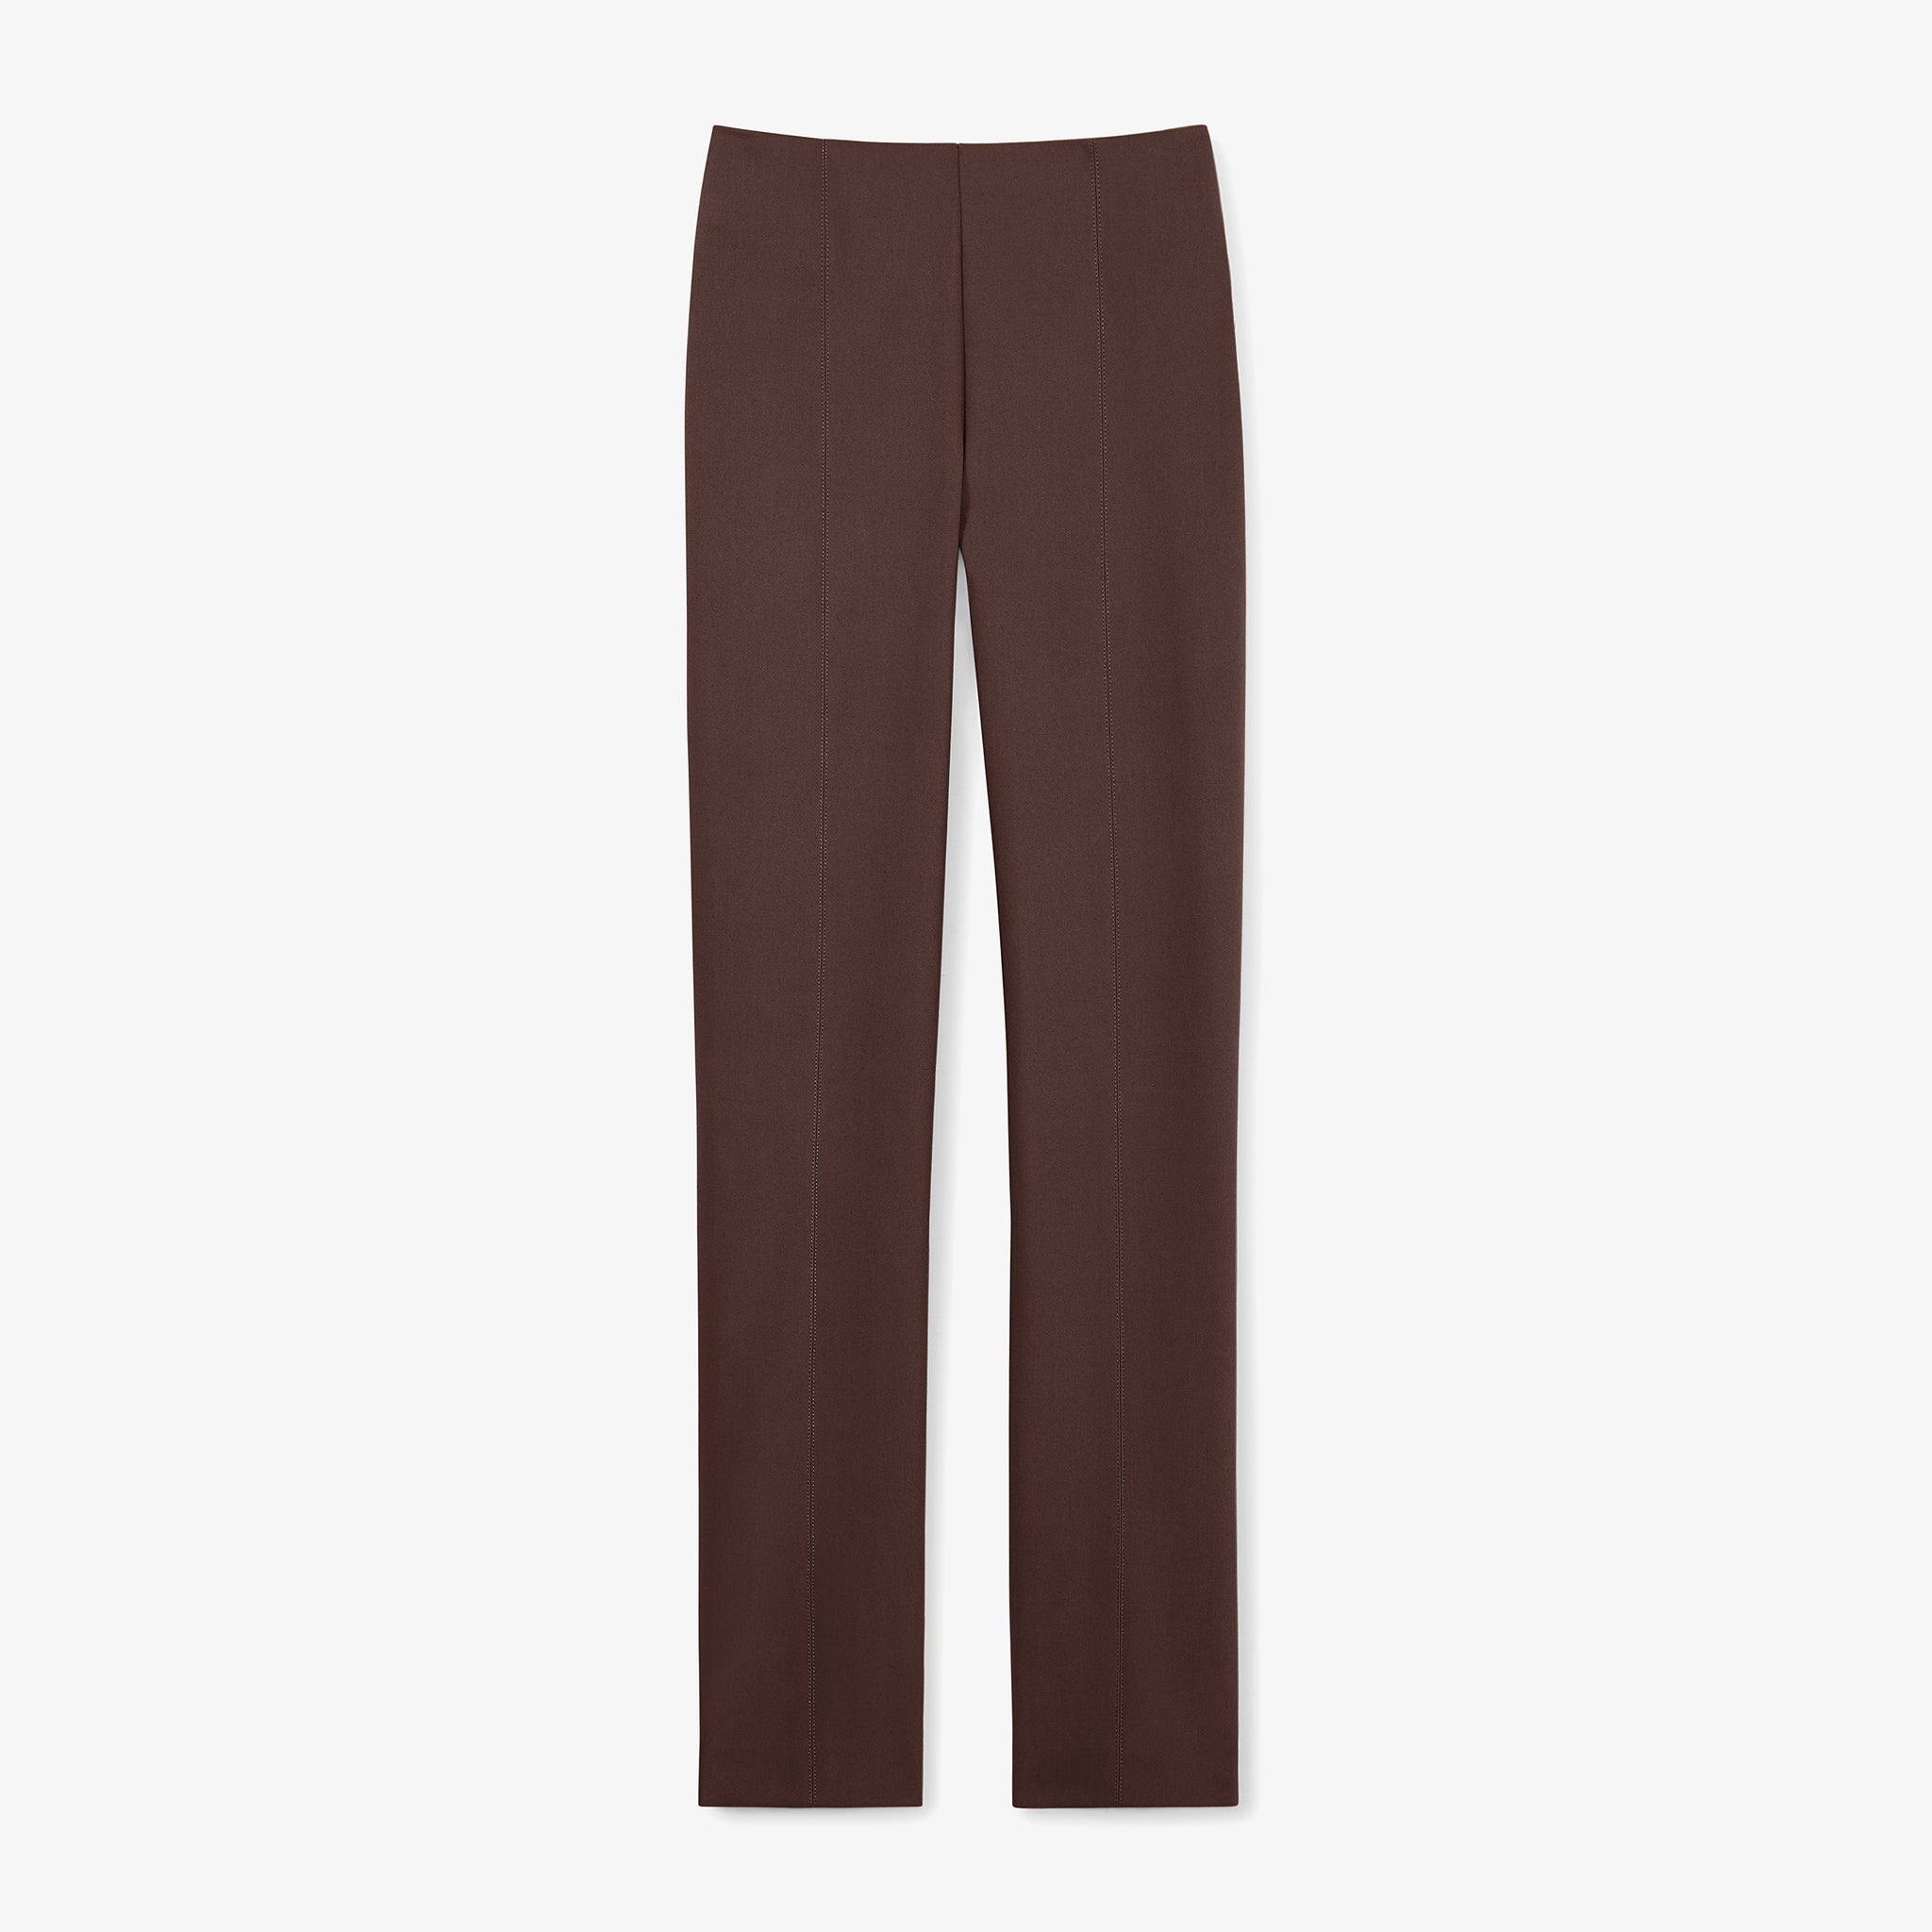 packshot image of the foster pants in Mahogany